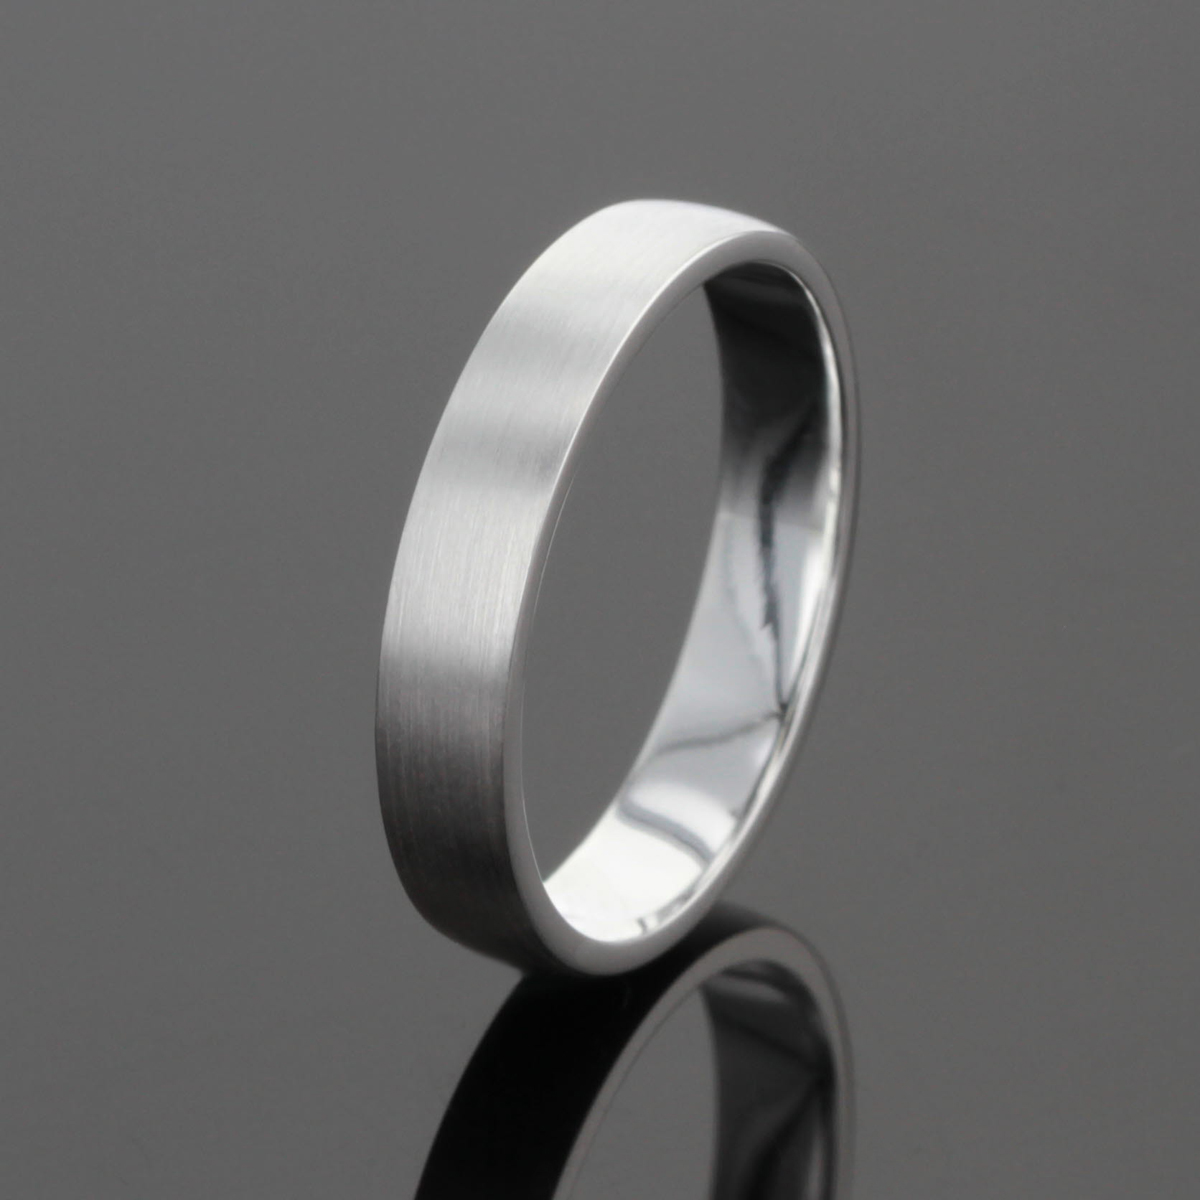 Zea jewellery - unique ring designs in sterling silver